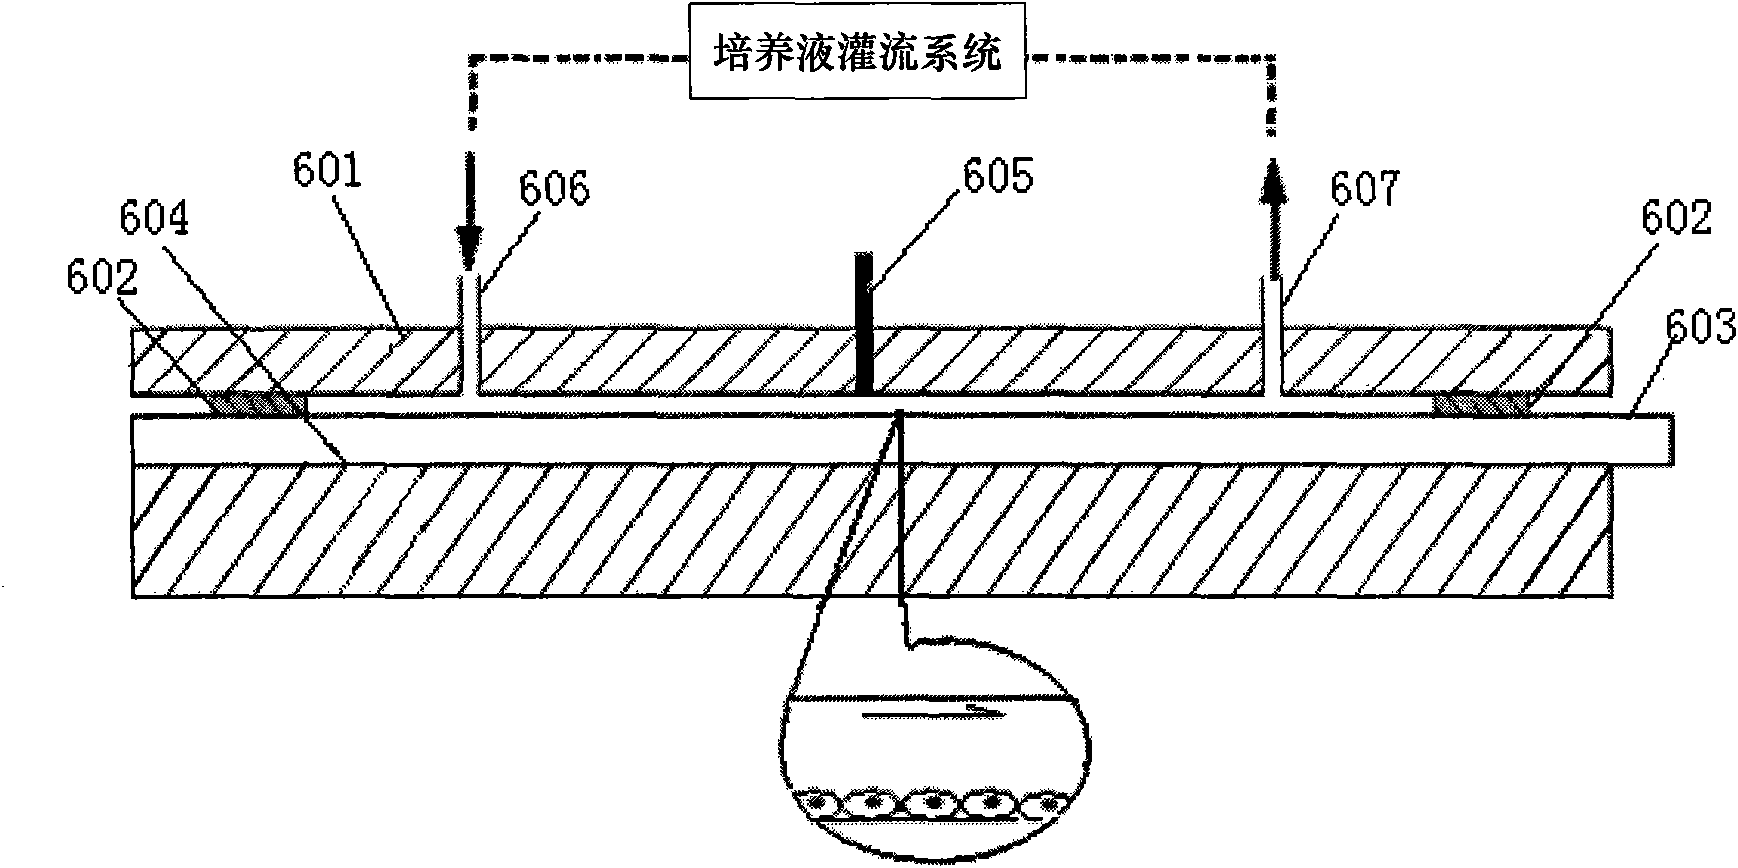 Shearing force-electricity combined stimulation cell culture device